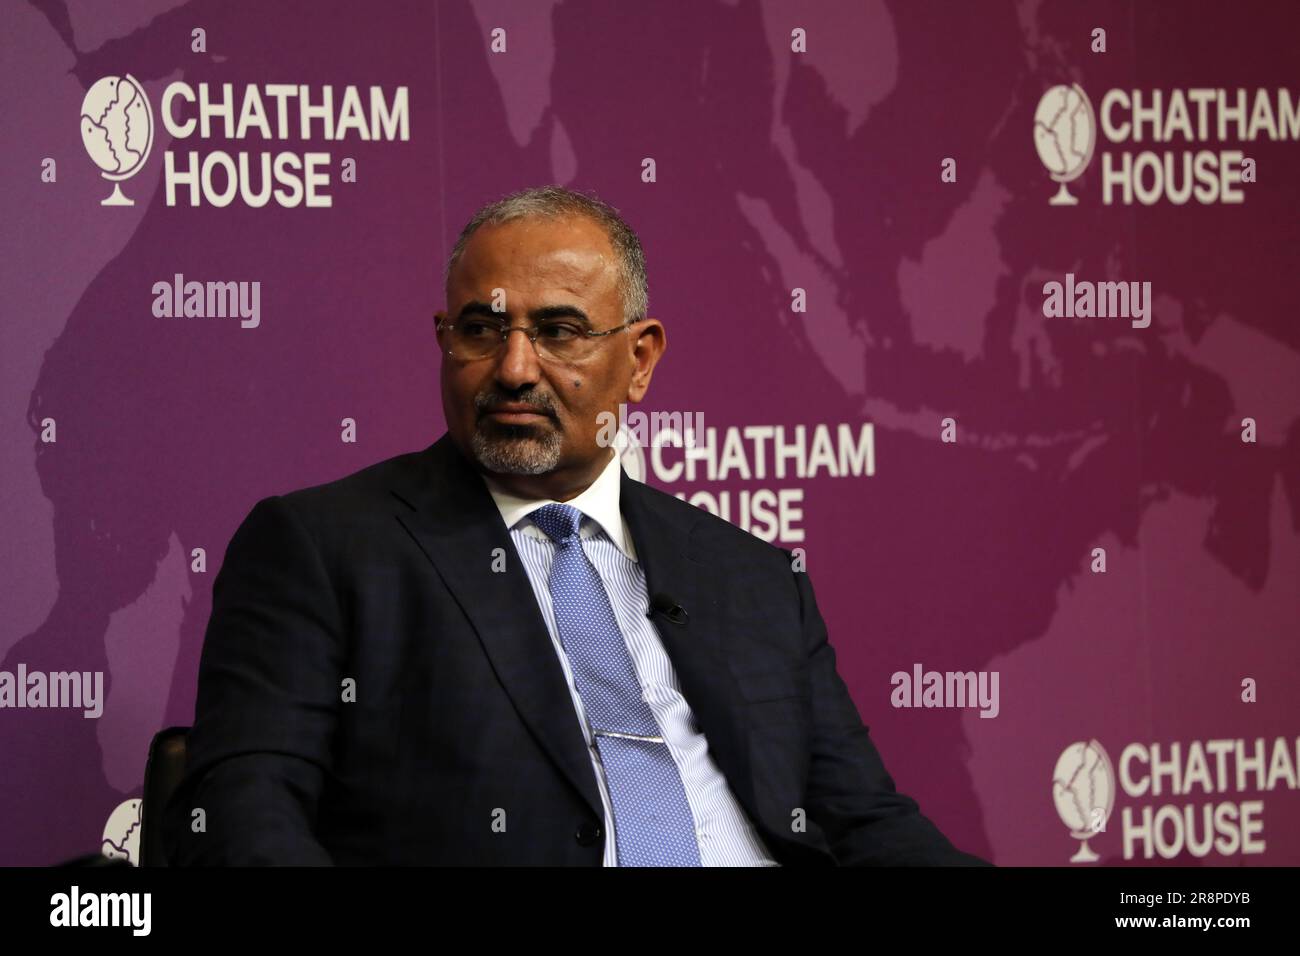 Yemen’s Southern Transitional Council (STC) President Major General Aidarous Qassem Al-Zubaidi at Chatham House in London, UK on 22 June 2023 Stock Photo